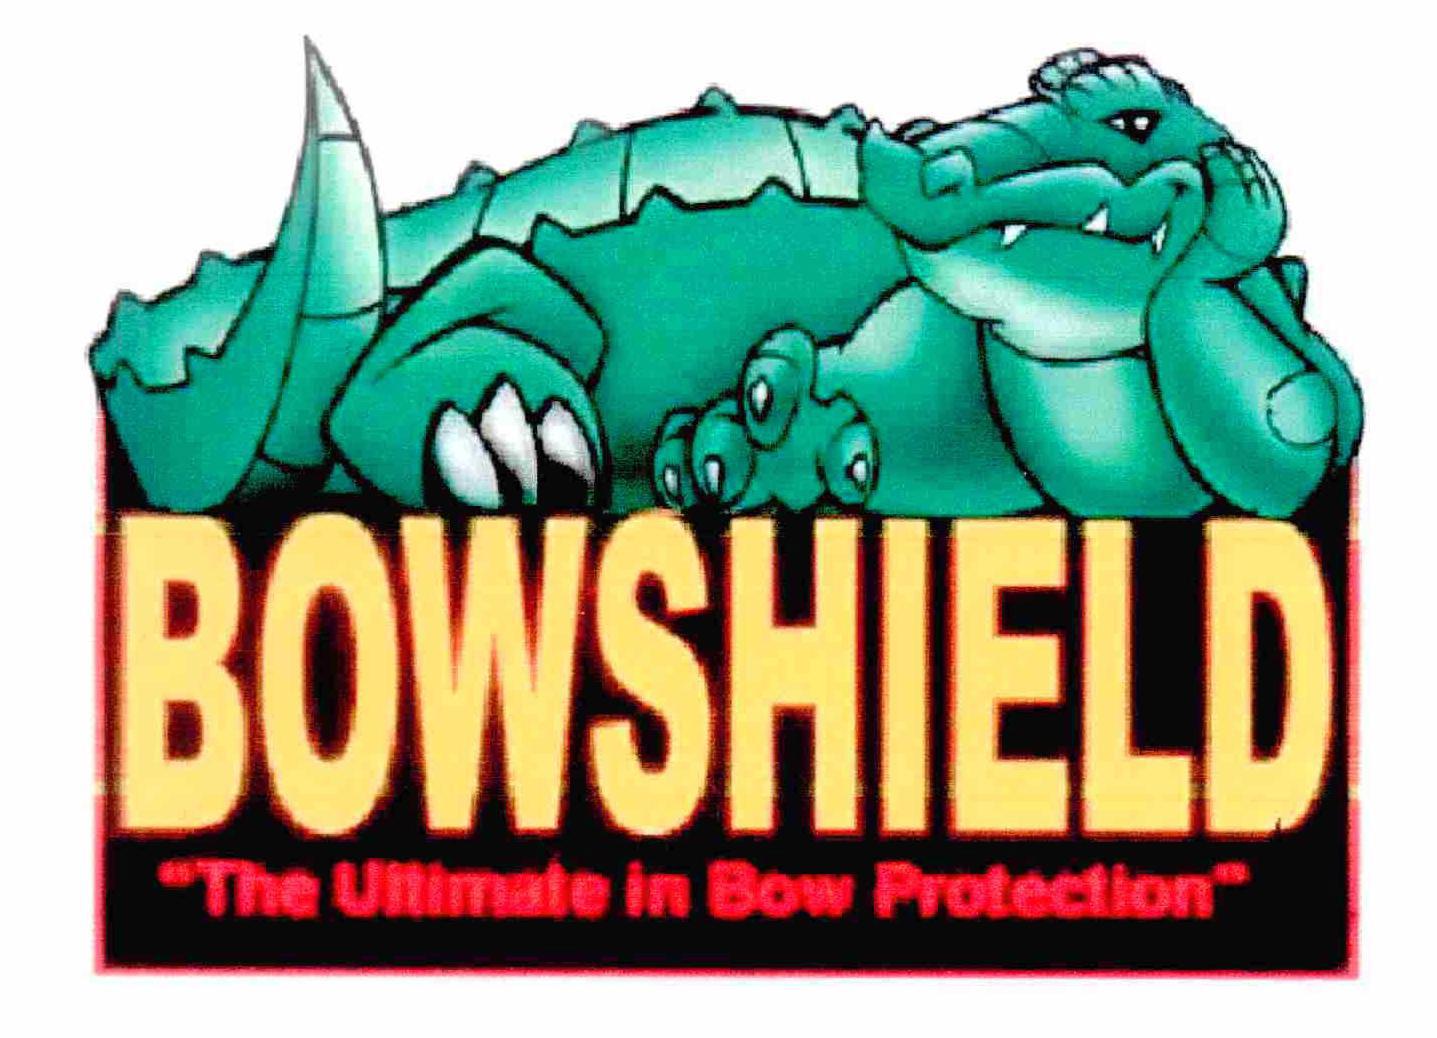  BOWSHIELD "THE ULTIMATE IN BOW PROTECTION"